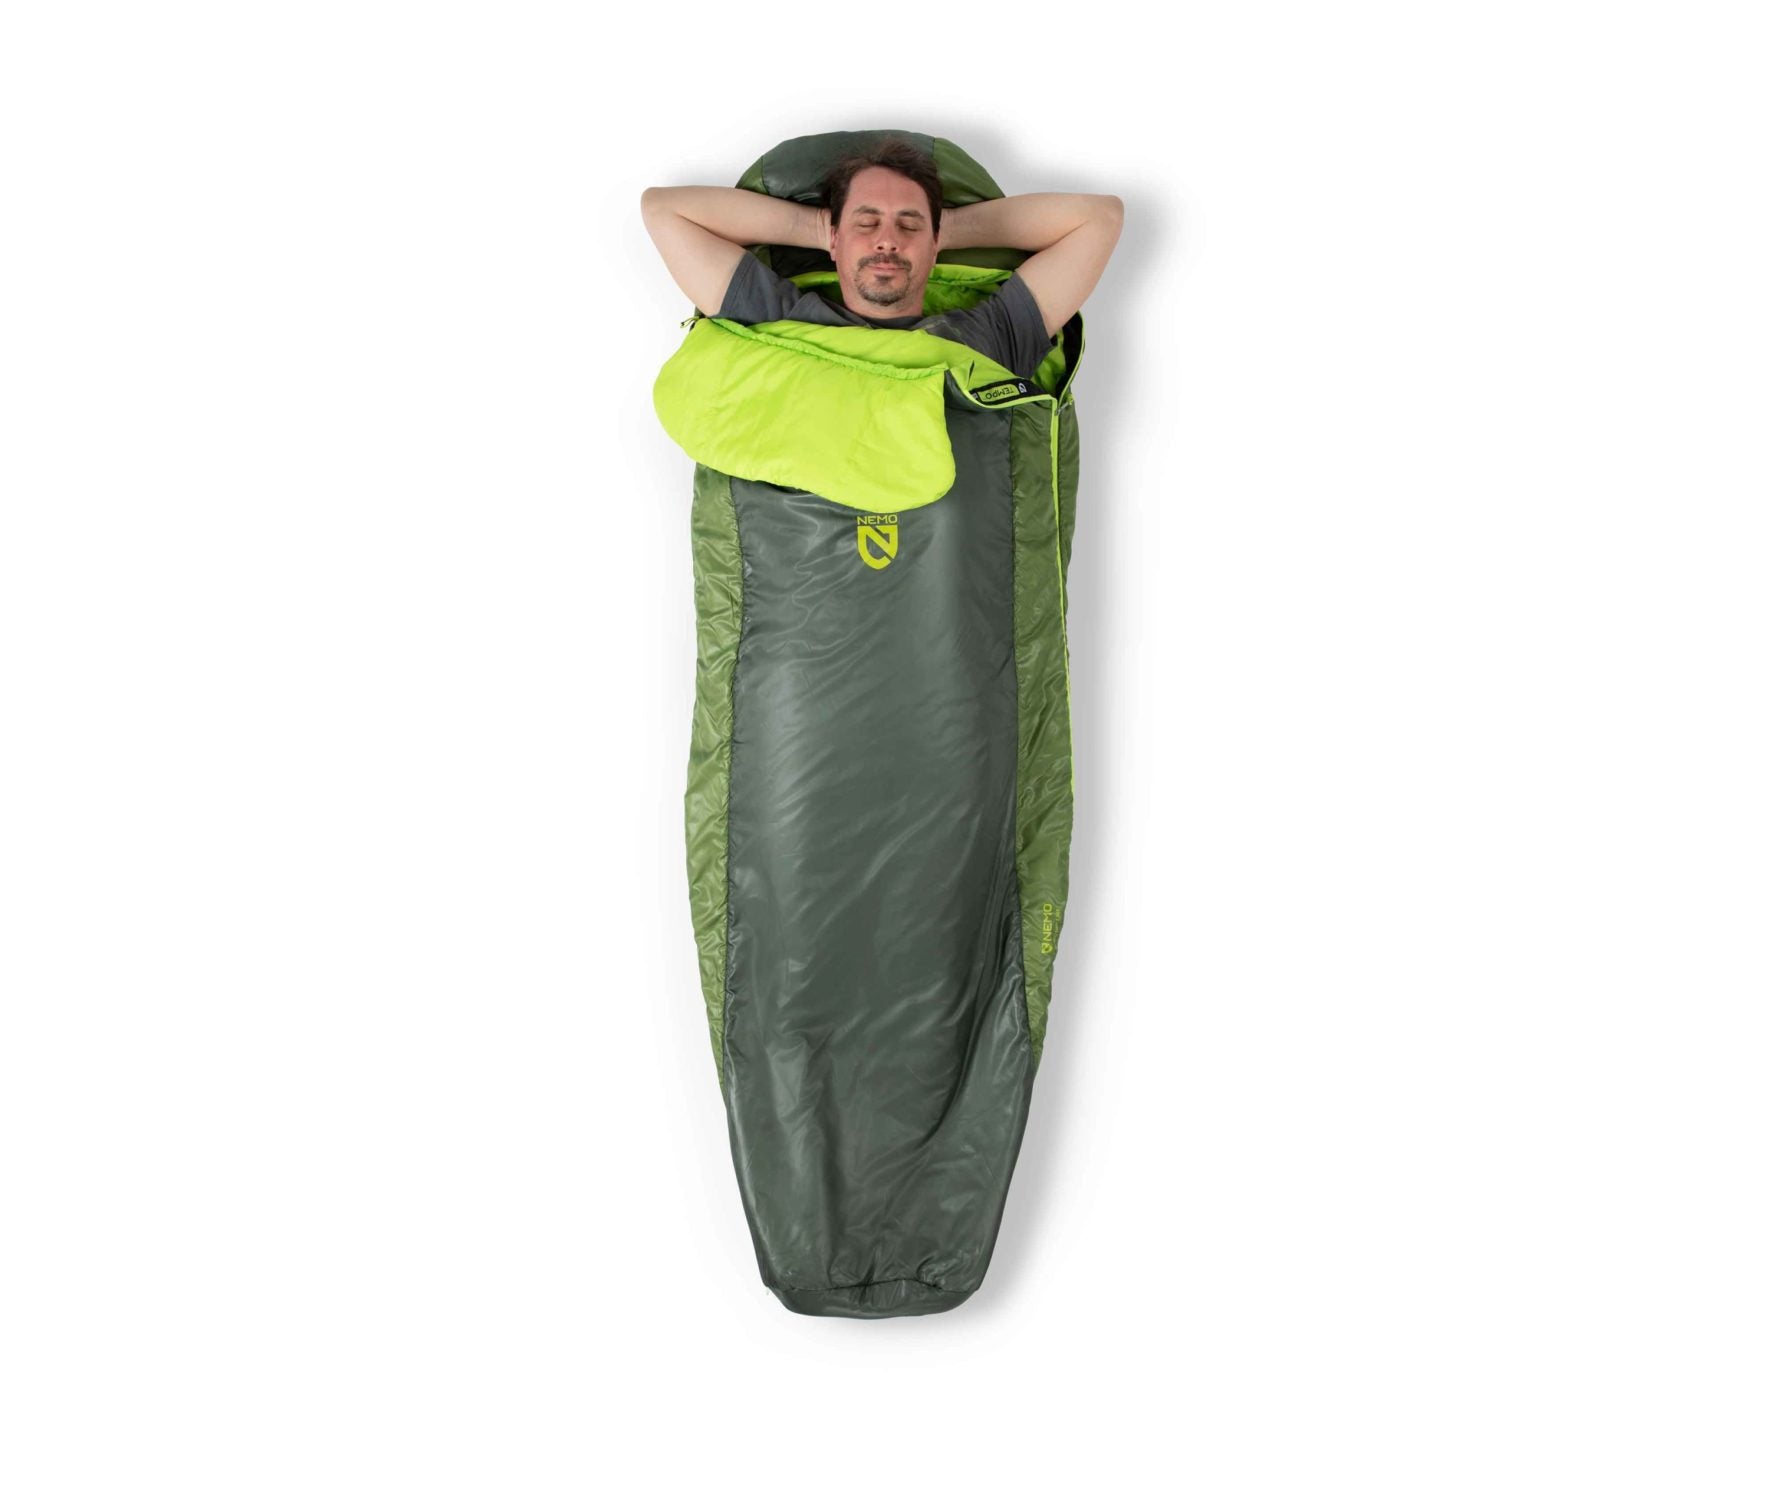 Tempo™ Men's Synthetic Sleeping Bag 35º - Discontinued